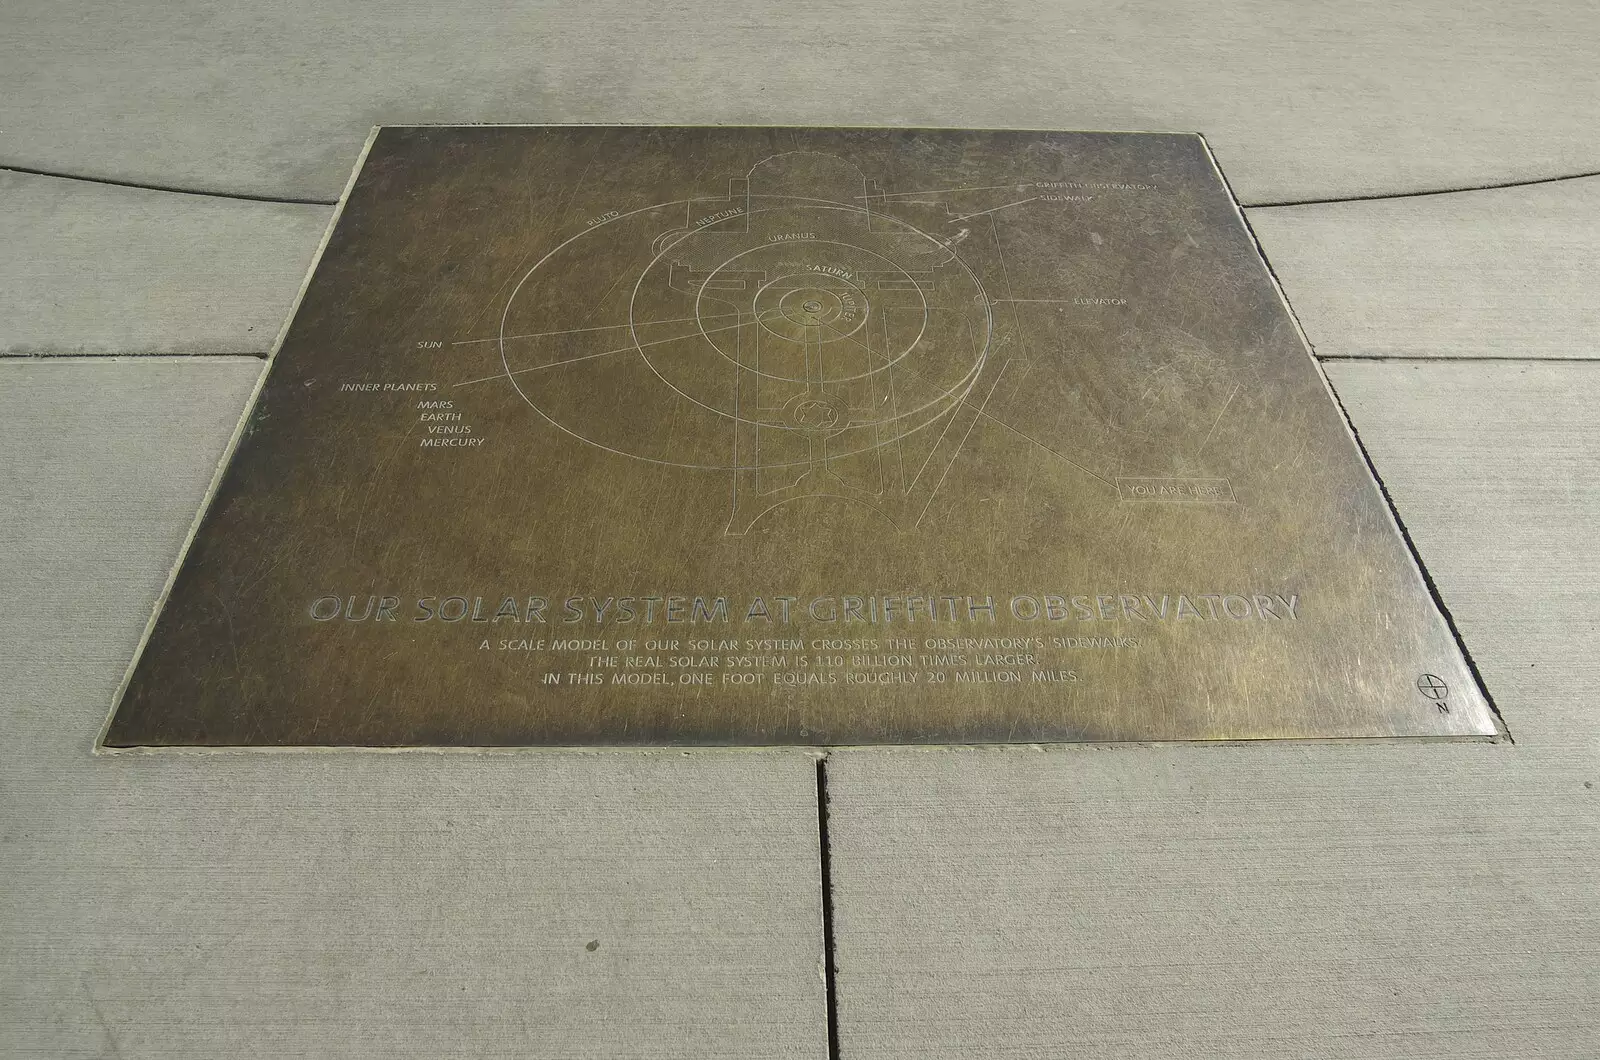 A brass engraving of the solar system, from San Diego and Hollywood, California, US - 3rd March 2008